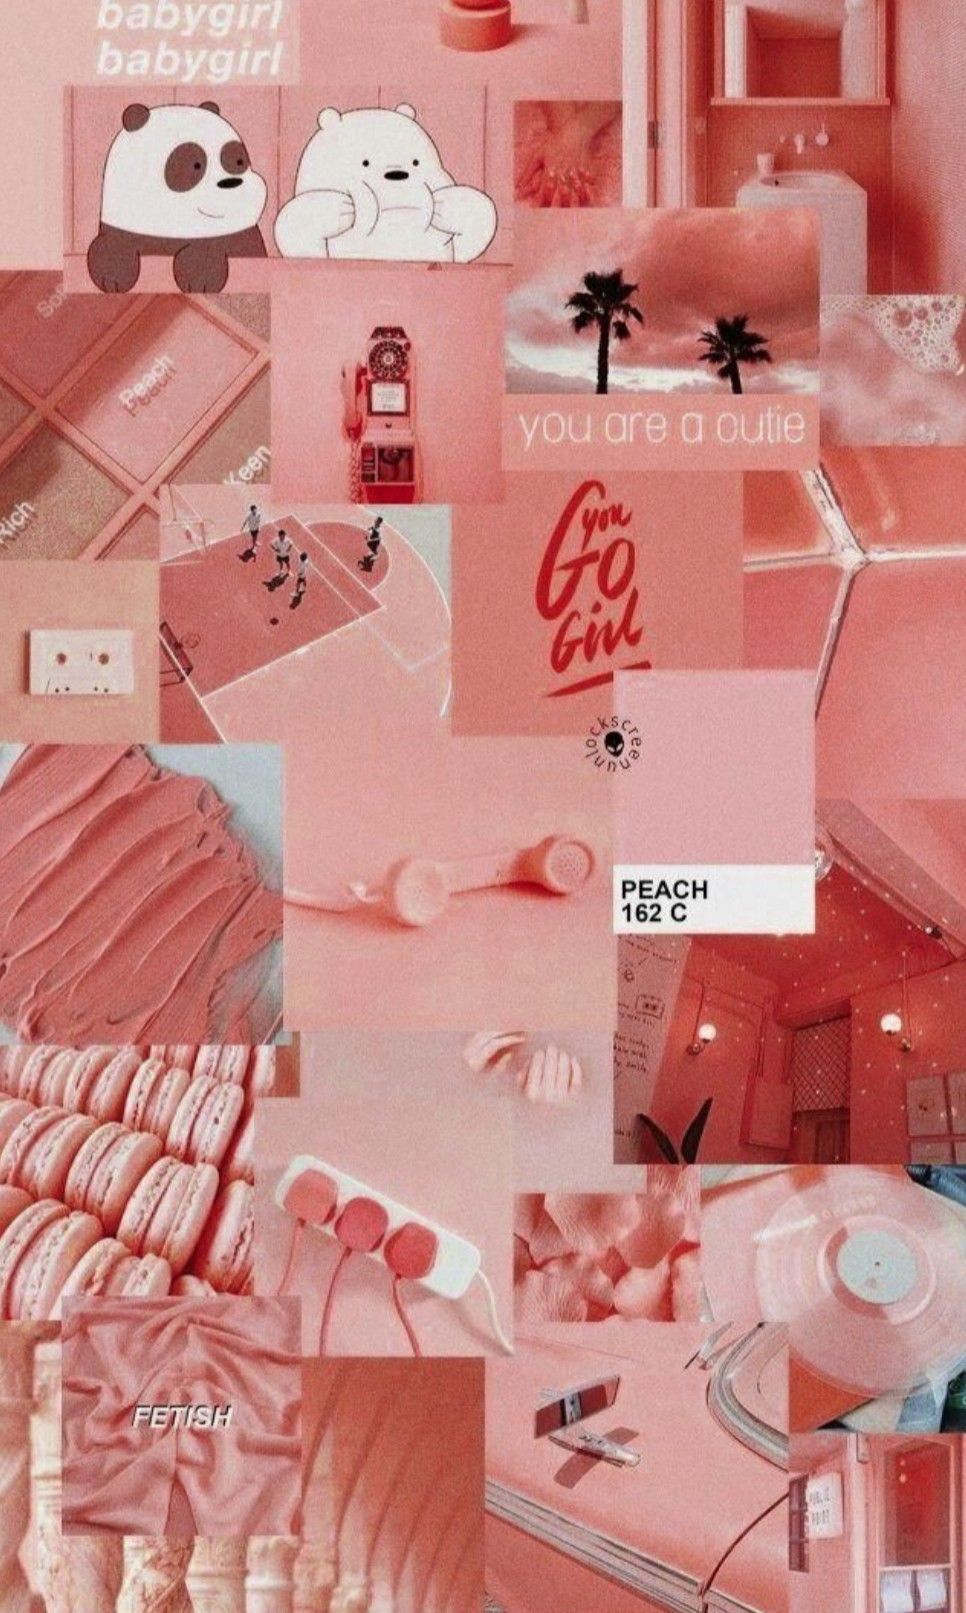 Aesthetic collage of pink and white photos - Pink